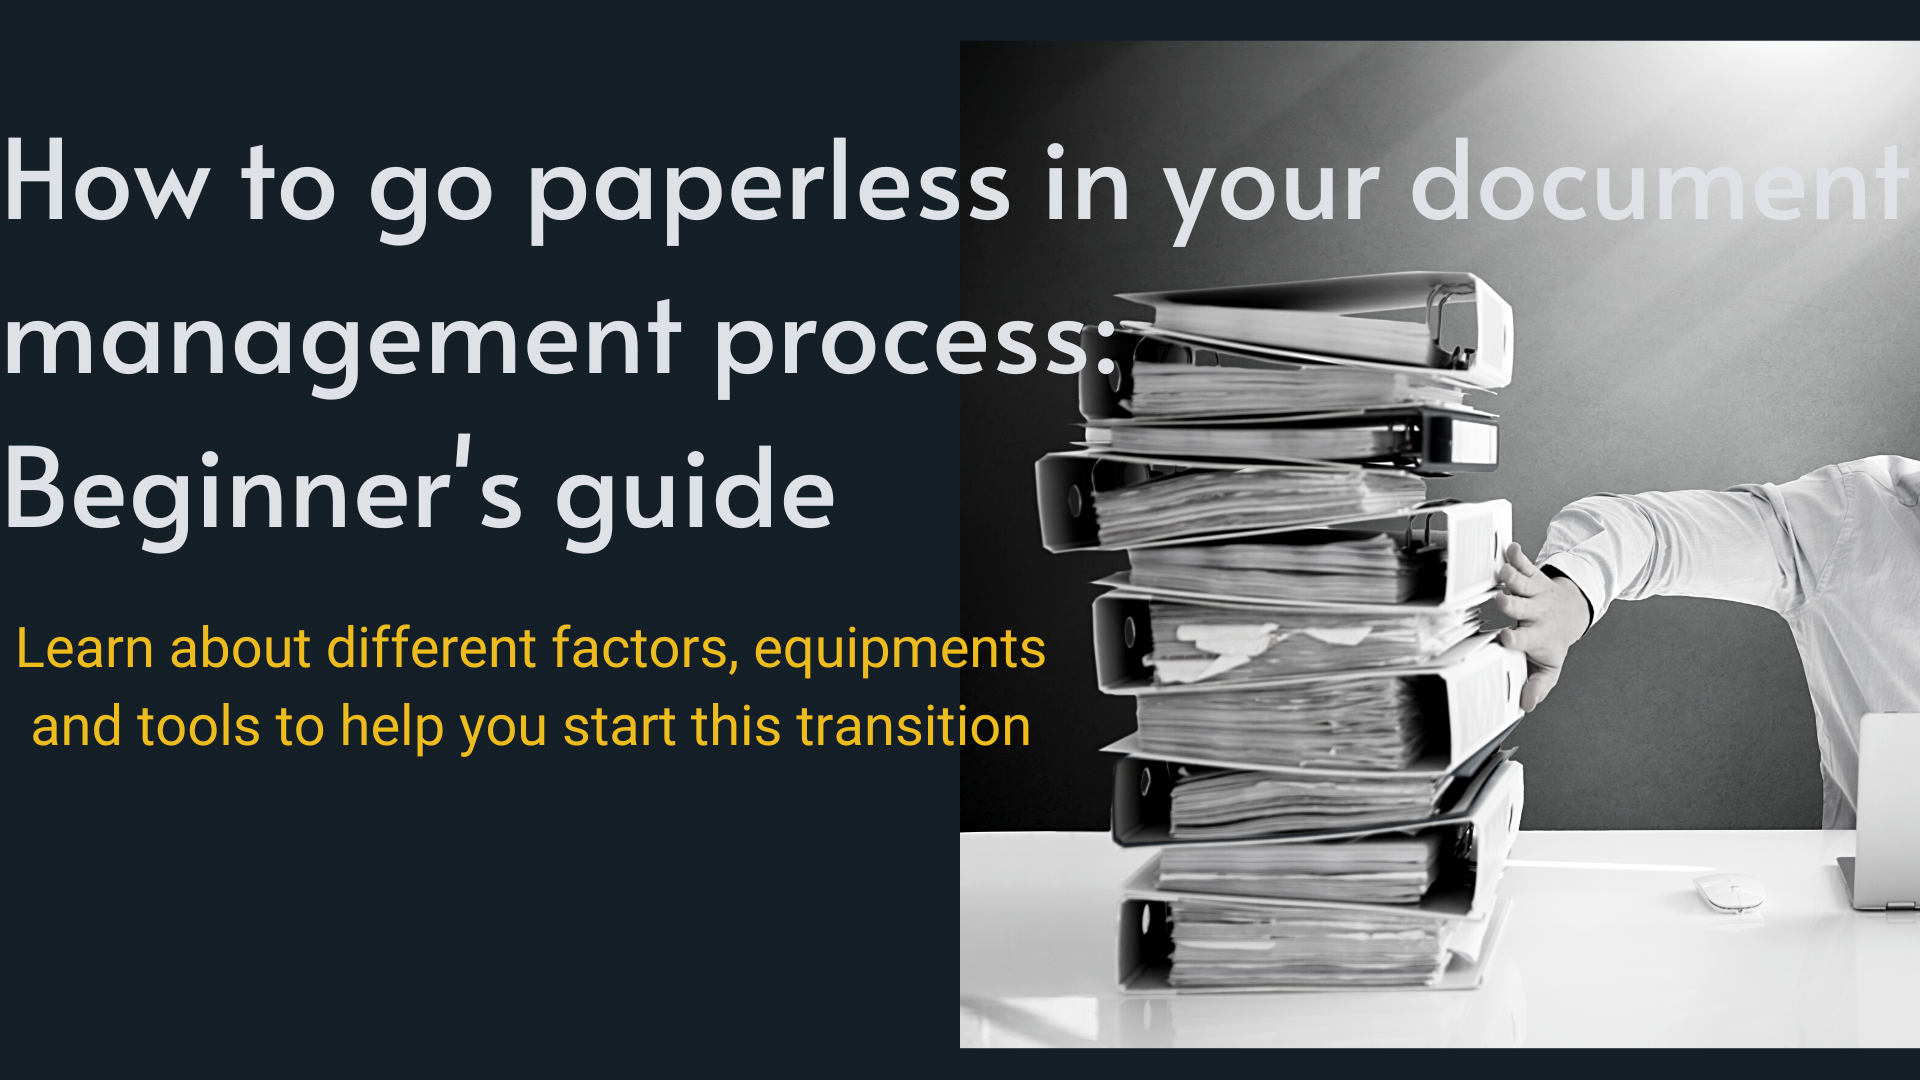 Beginners guide to go paperless in your document management process